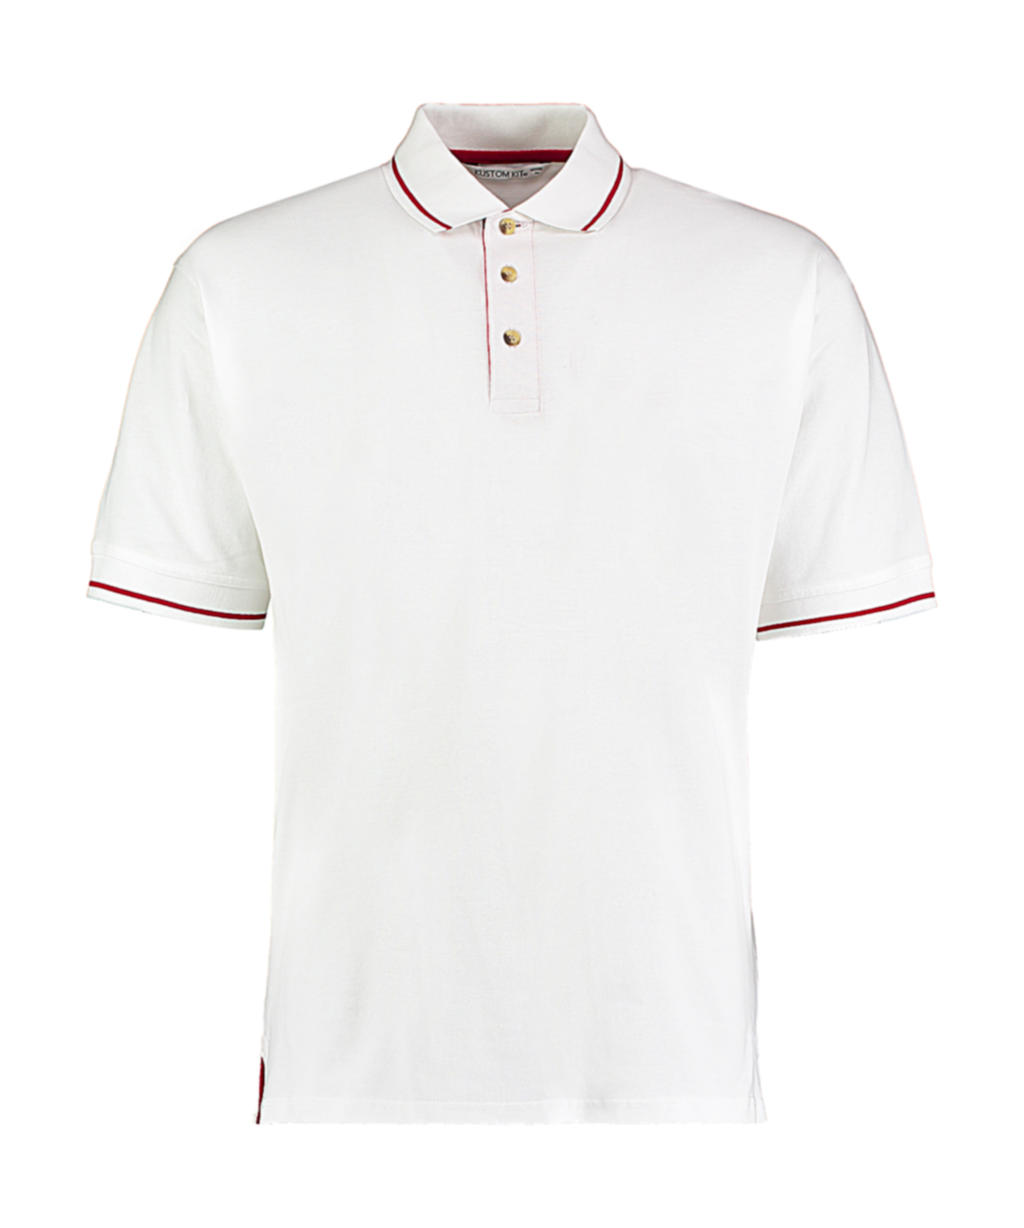  Mens Classic Fit St. Mellion Polo in Farbe White/Bright Red